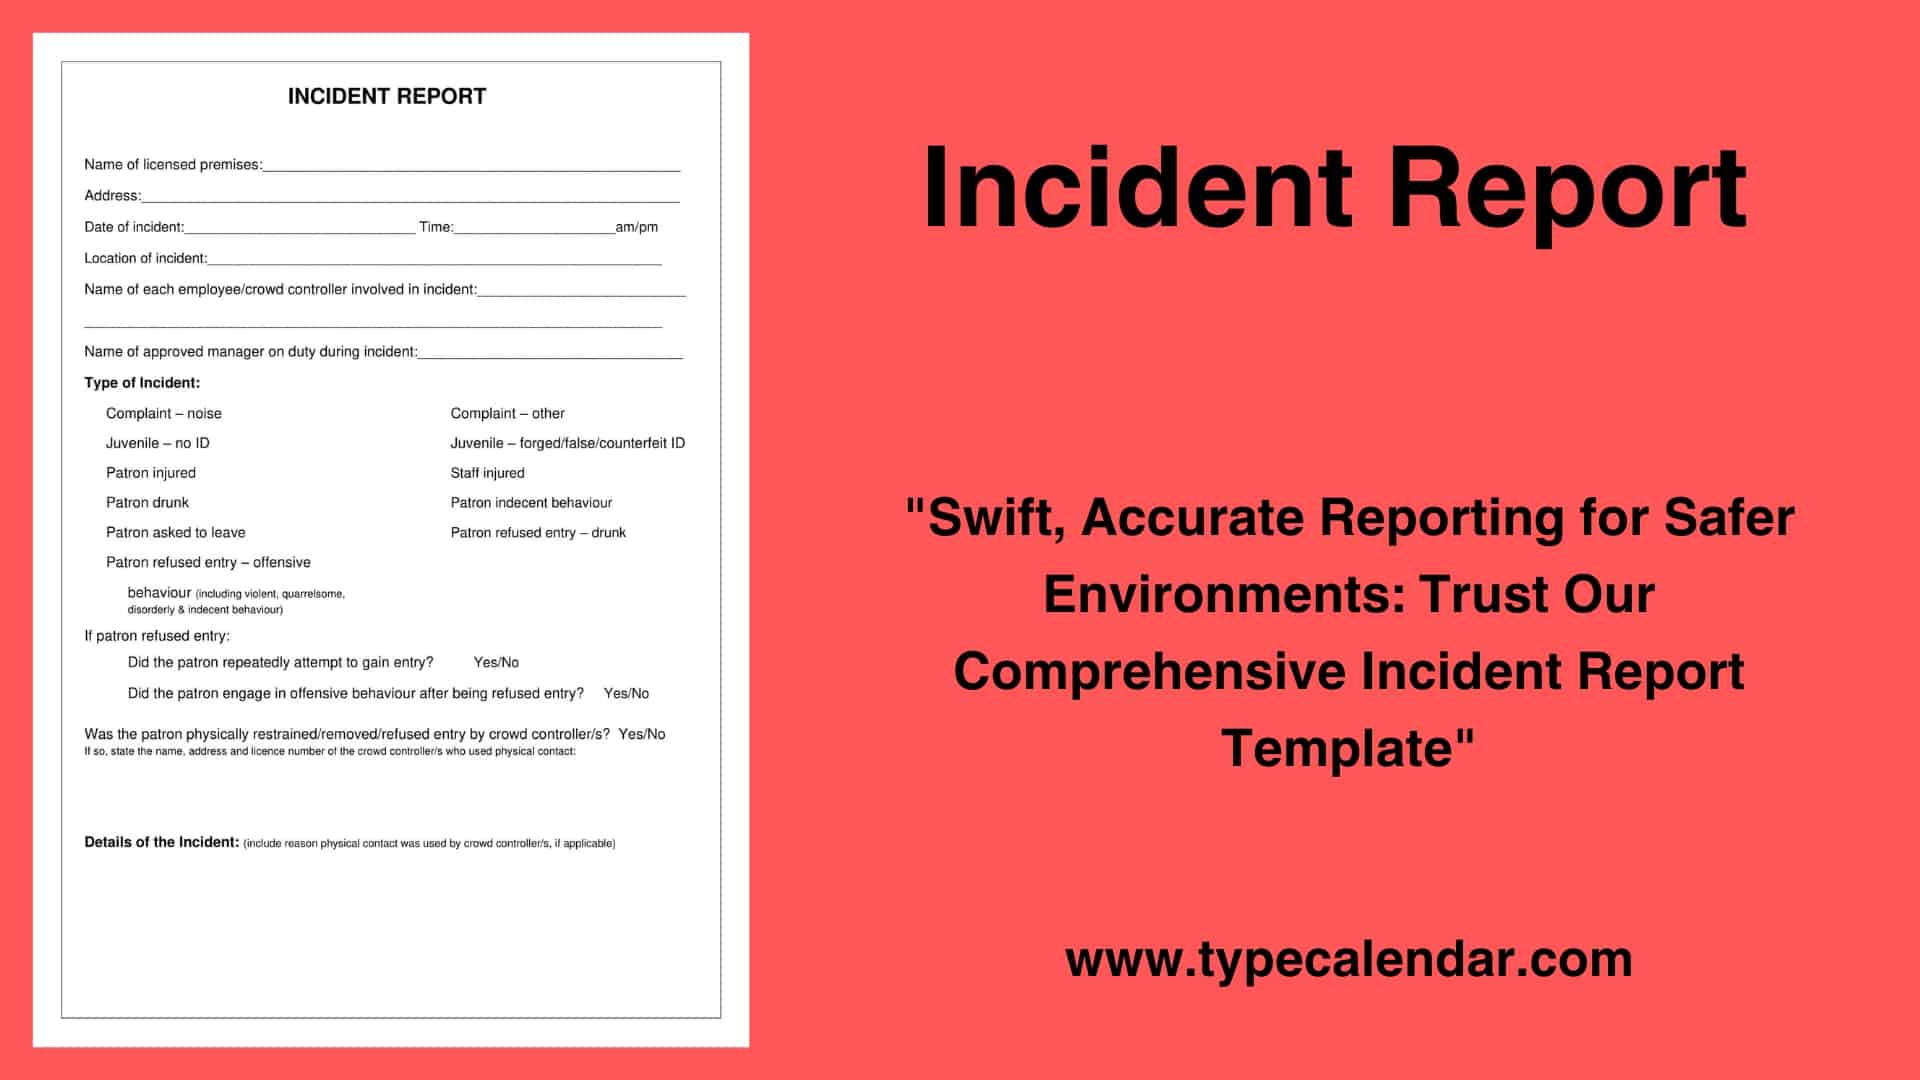 Writing A Police Report Template